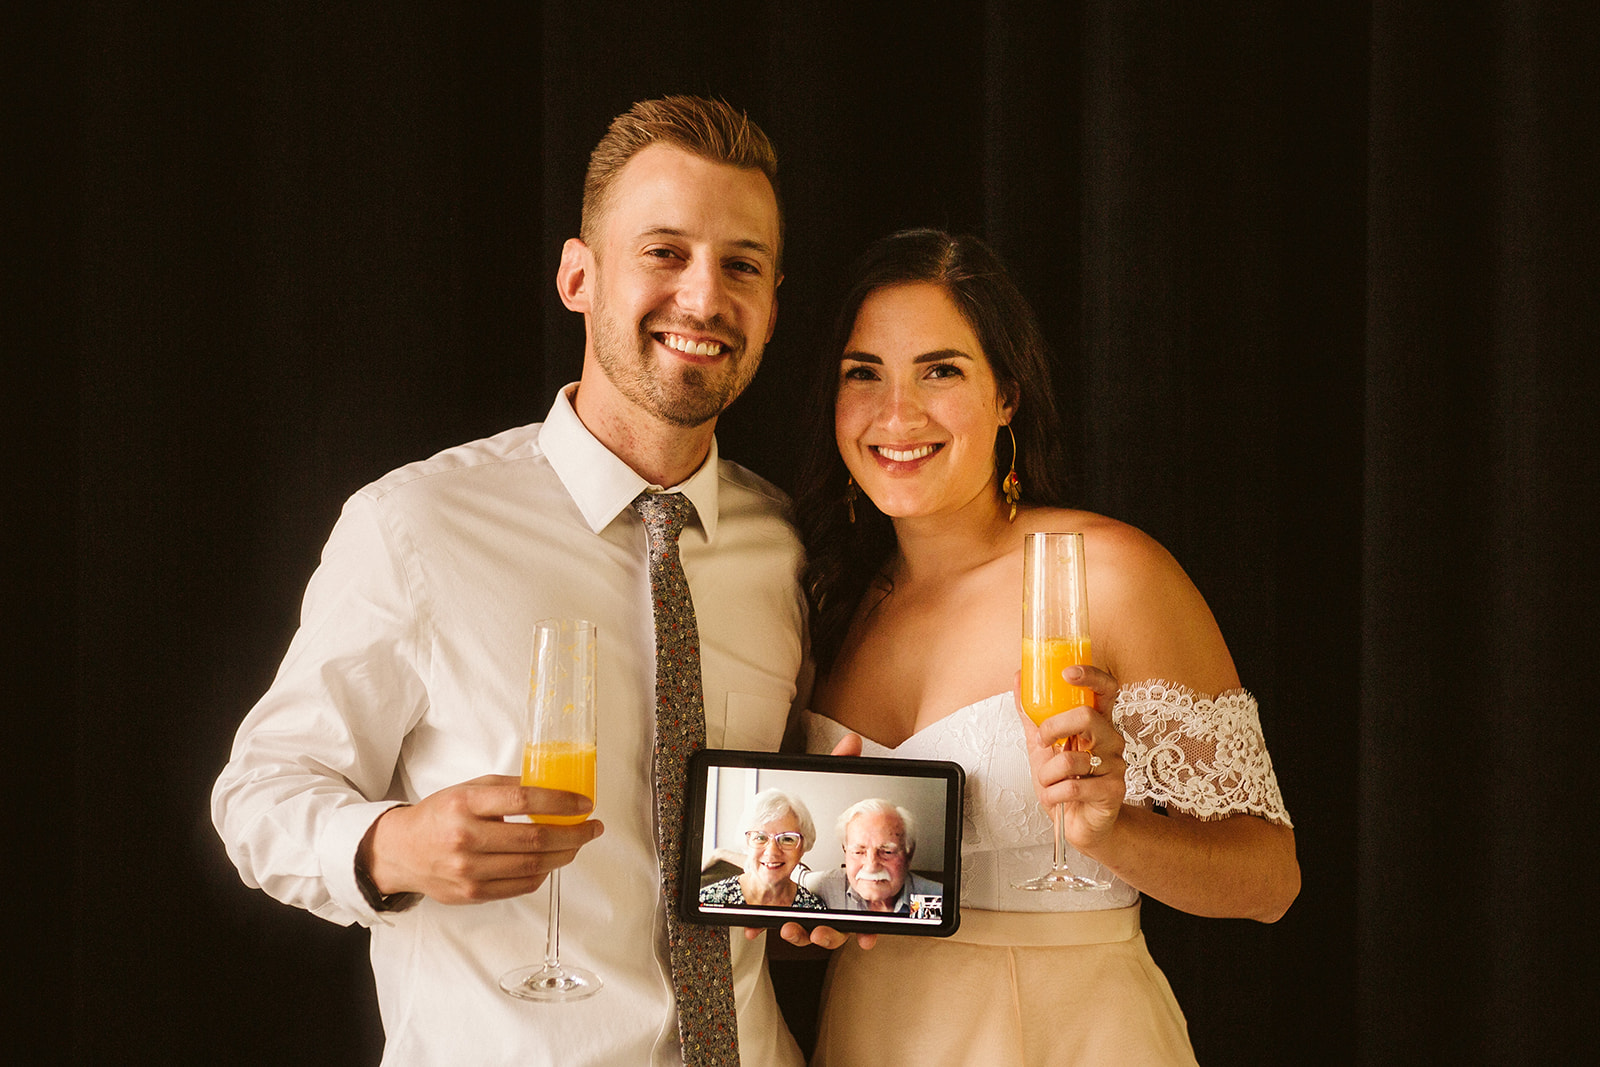 A bride and groom pose with mimosas while holding an iPad, which they're using to Facetime with family.